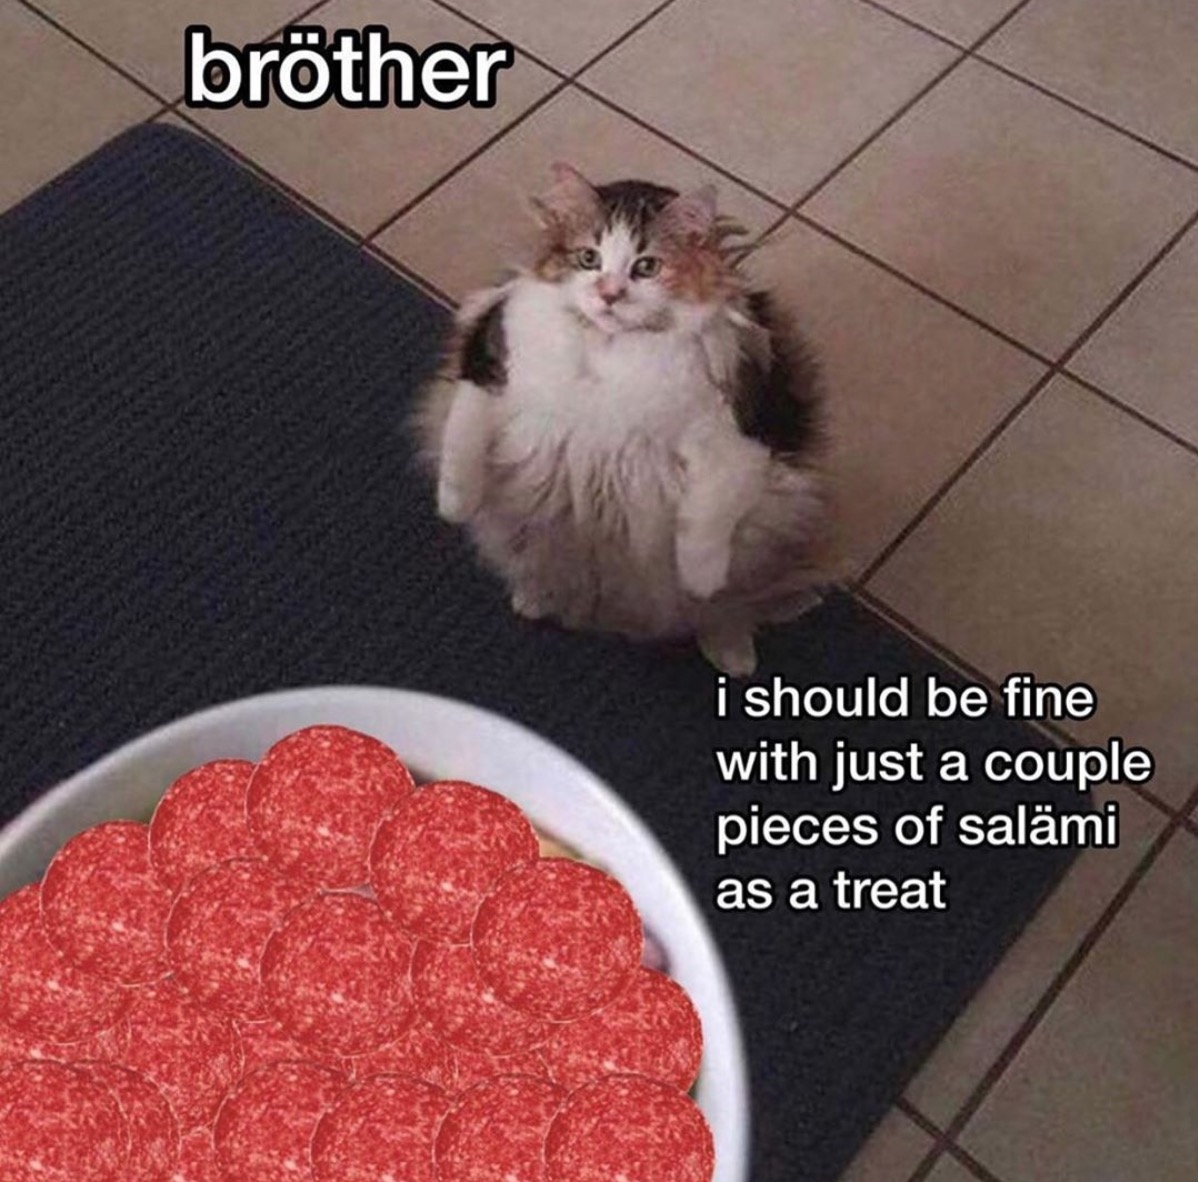 salami cat - fruit loops brother - brtoher i should be fine with just a couple pieces of salami as a treat